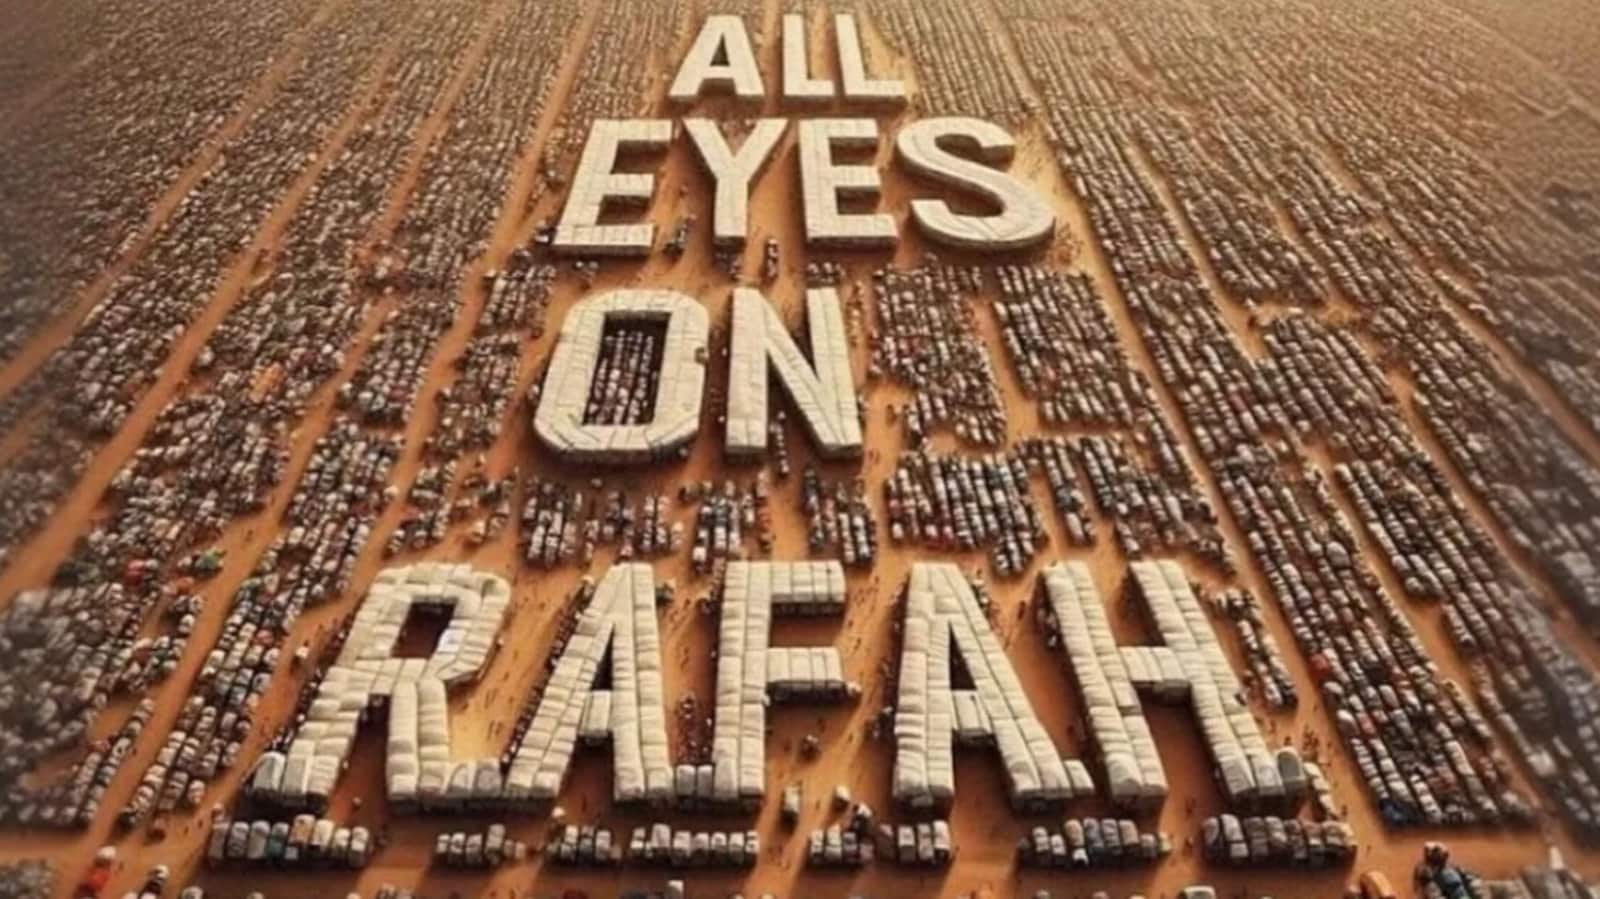 ‘All eyes on Rafah’ image shared 44 million times on Instagram; Israel counters viral trend